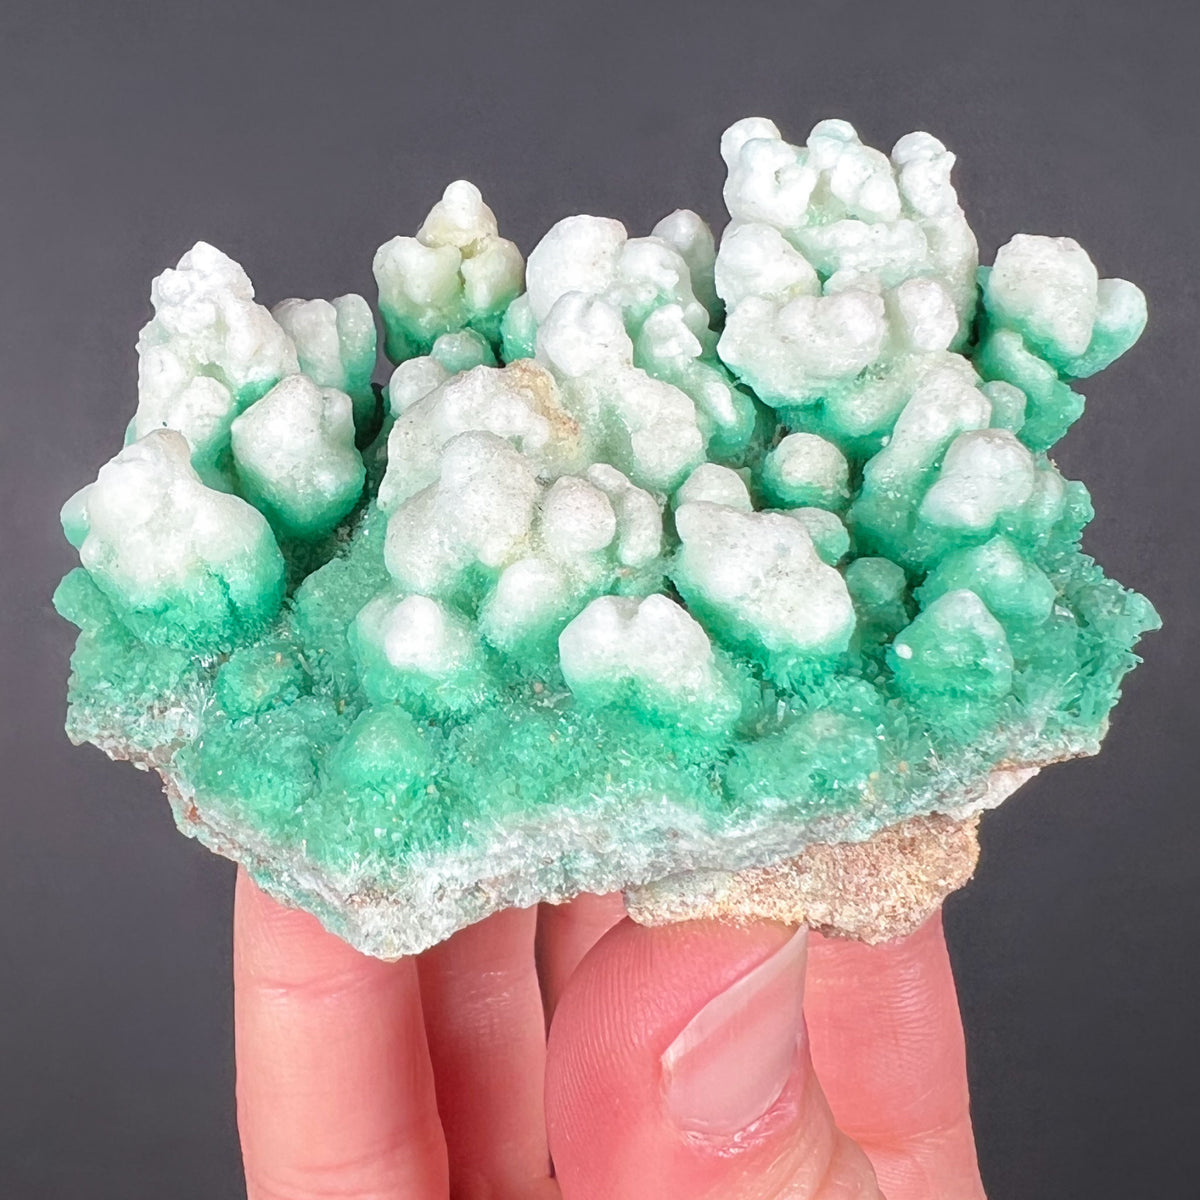 White and Green Selenite Crystals